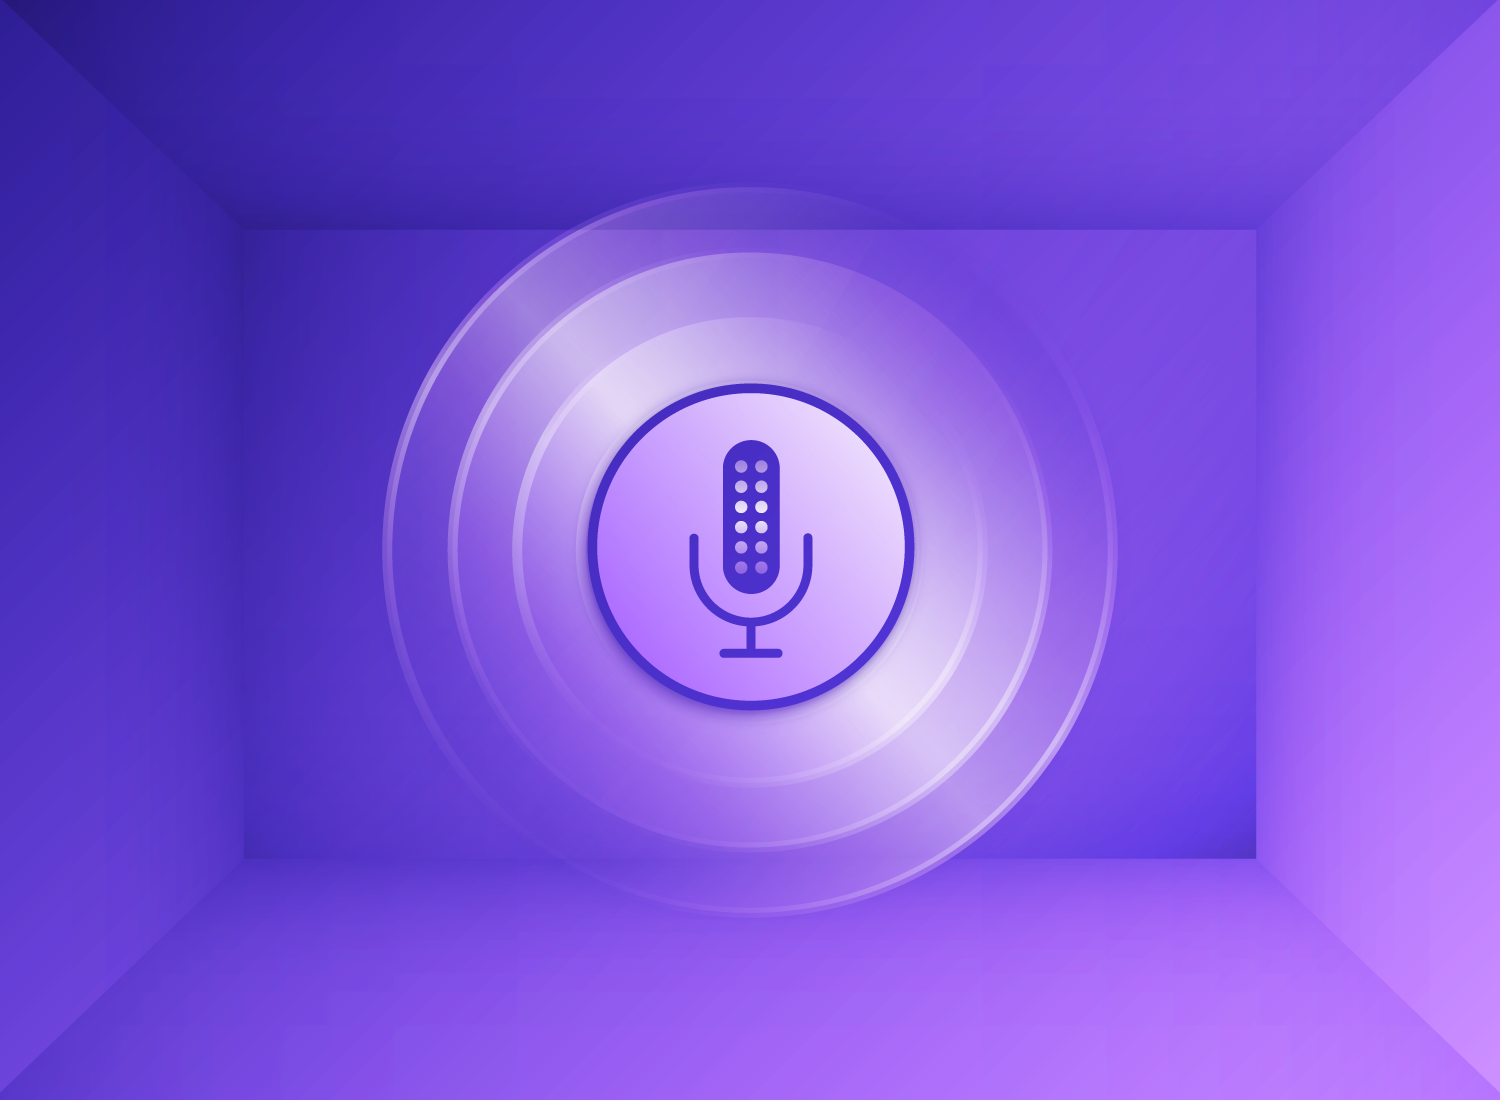 This image is a conceptual representation of soundproofing a room for voice recording. It features a gradient of purple hues creating a three-dimensional box-like room effect. In the center, a circular microphone is encased in multiple concentric circles, radiating outward, symbolizing sound waves.